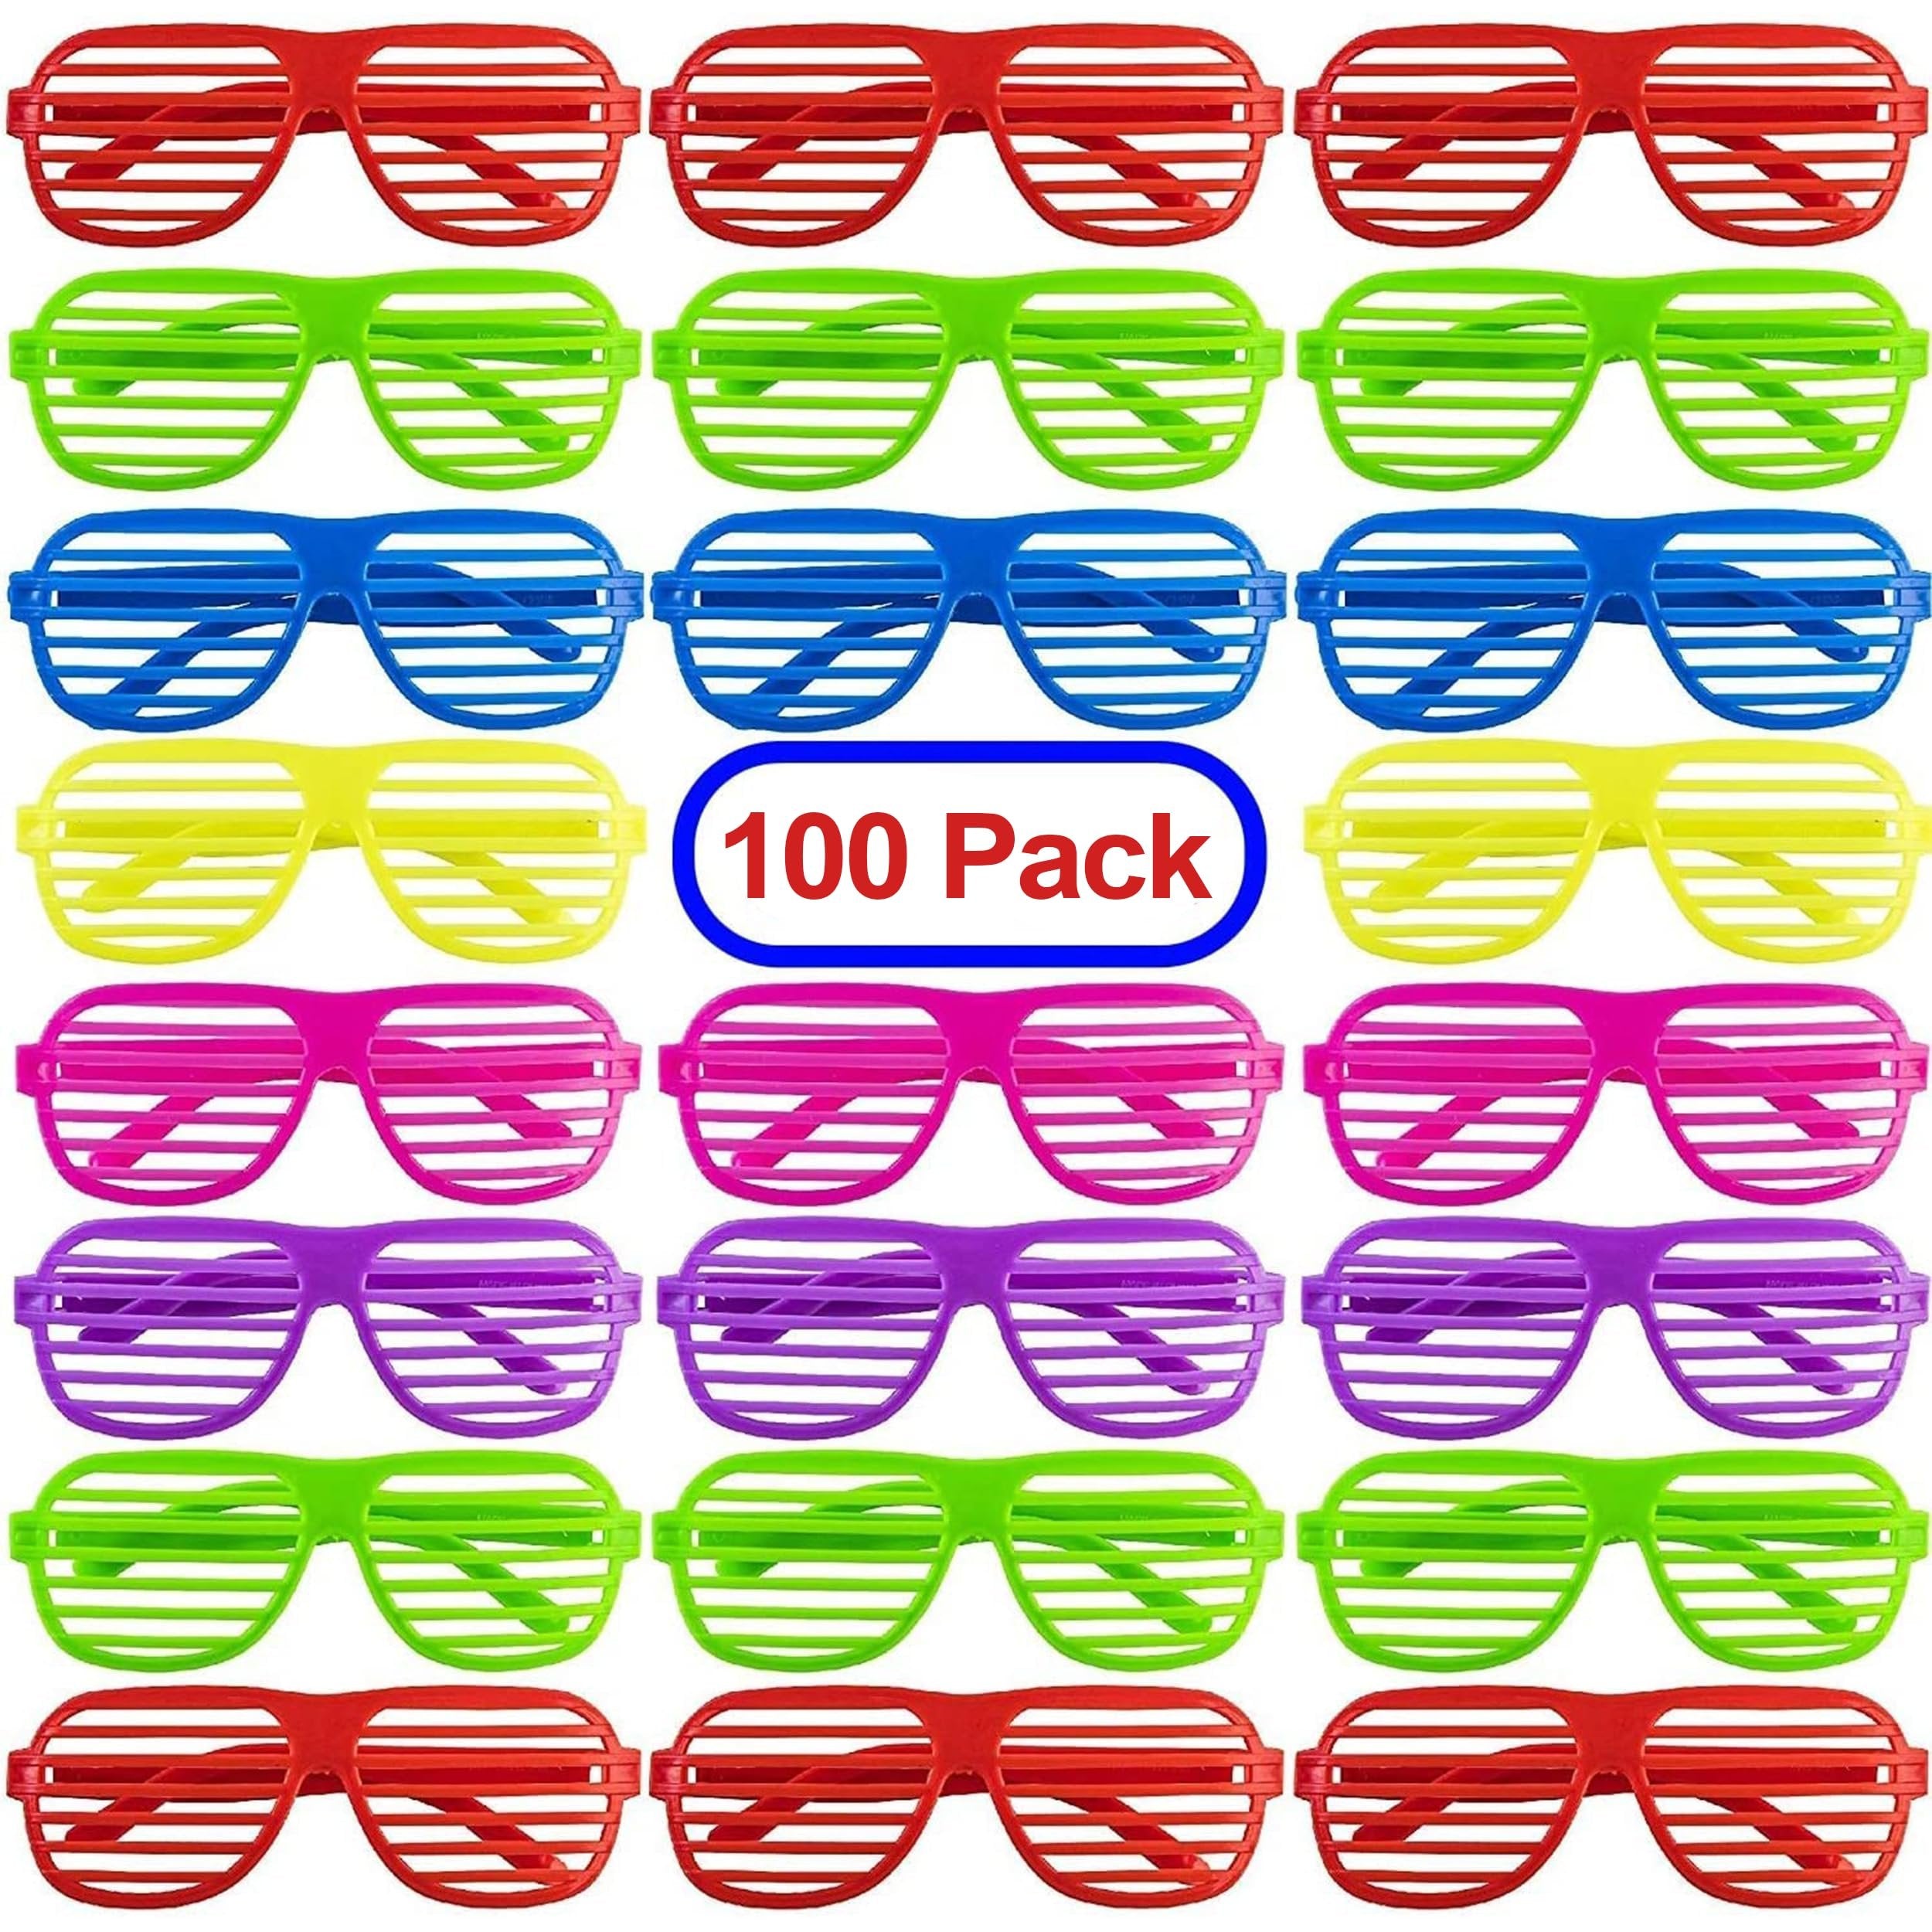 PREXTEX Mega Pack 100 Pairs of Kids Plastic Shutter Shades Glasses - Shades Sunglasses - Eyewear Party Favors and Party Props - Assorted Colors - Last Day of School Gifts for Kids